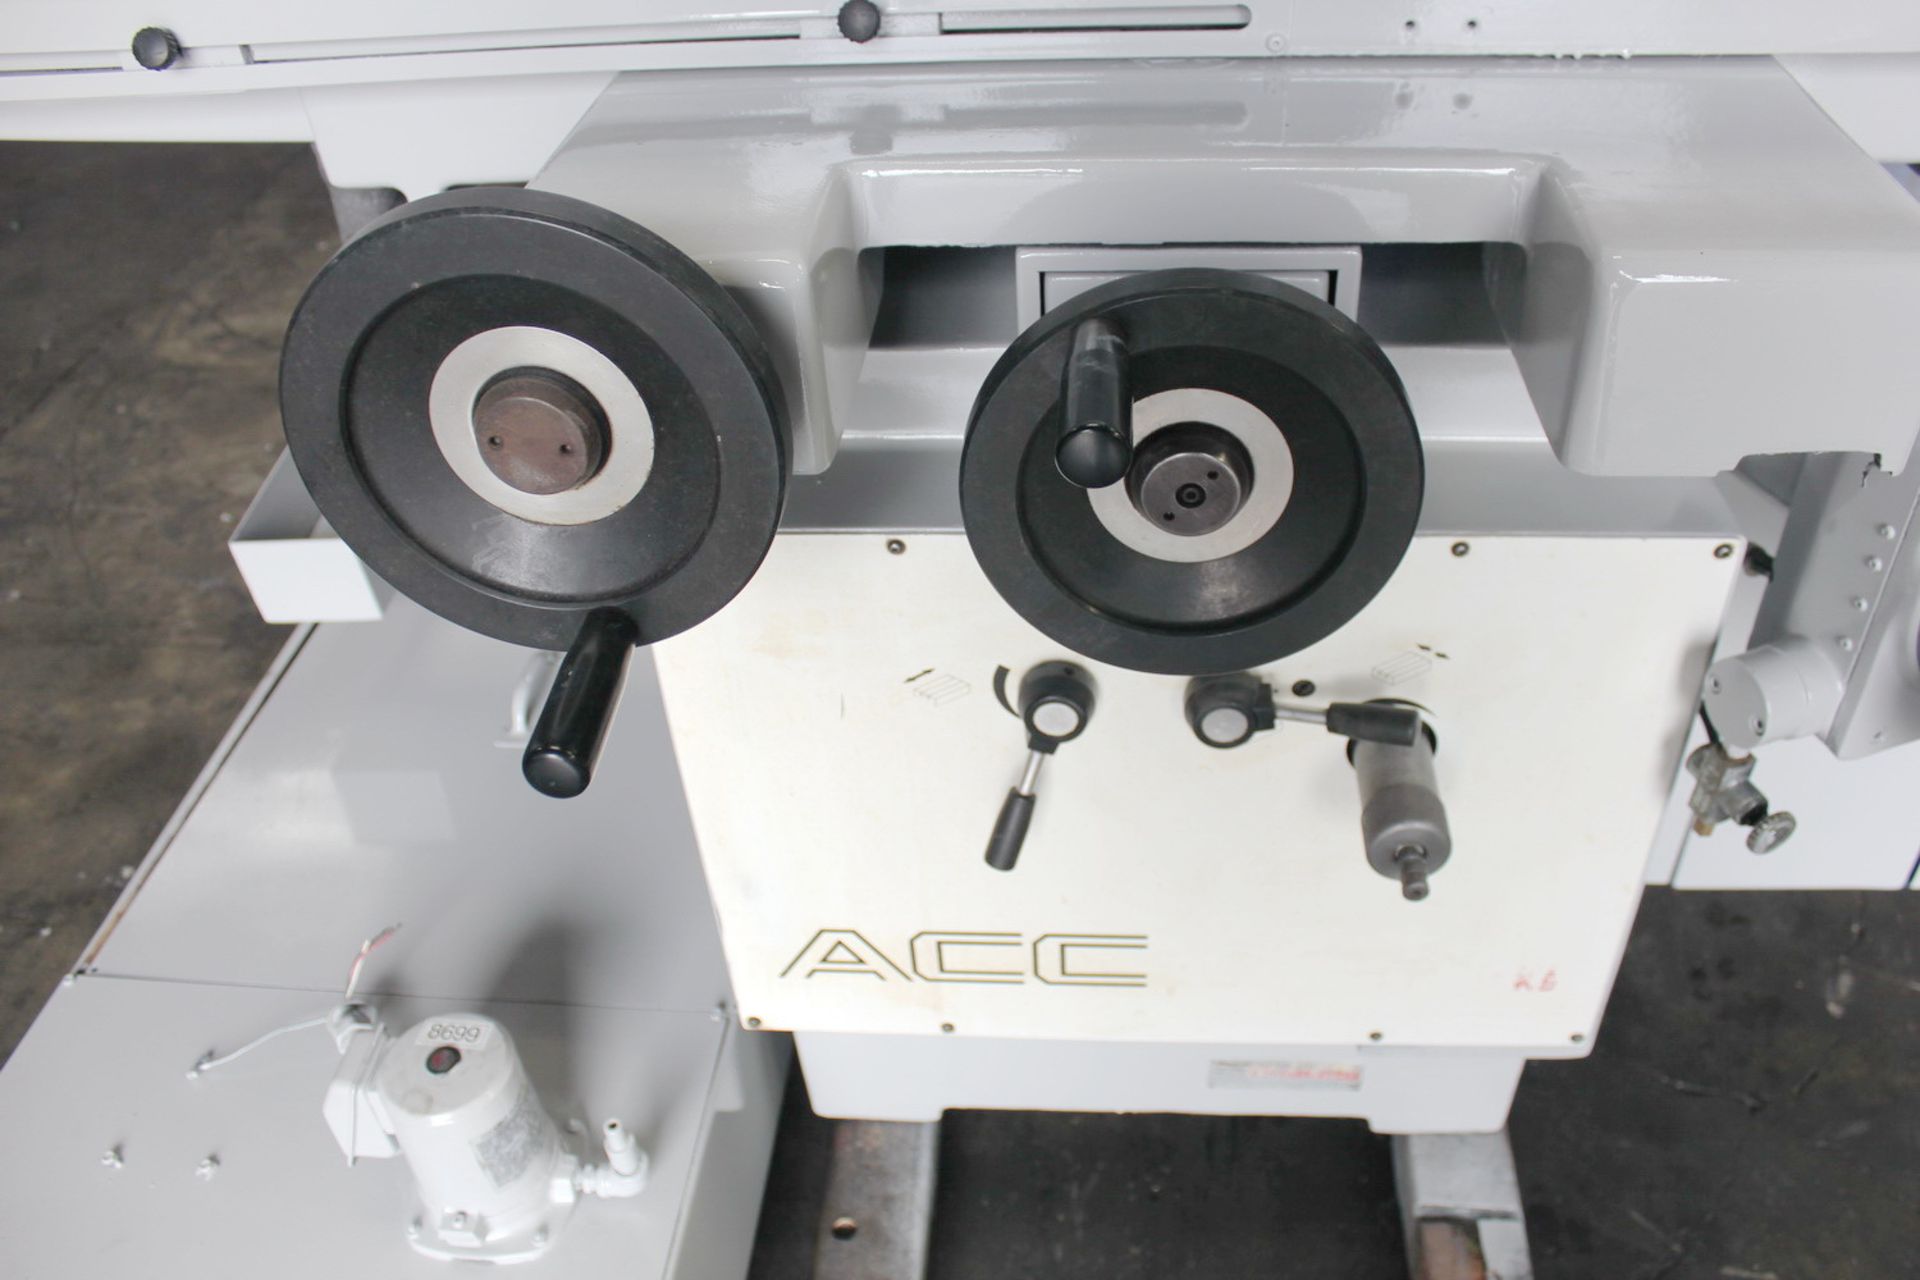 Okamoto Automatic Surface Grinder | 8" x 20", Mdl: ACC-8-20ST, S/N: 82041 - 8699HP - Image 18 of 26